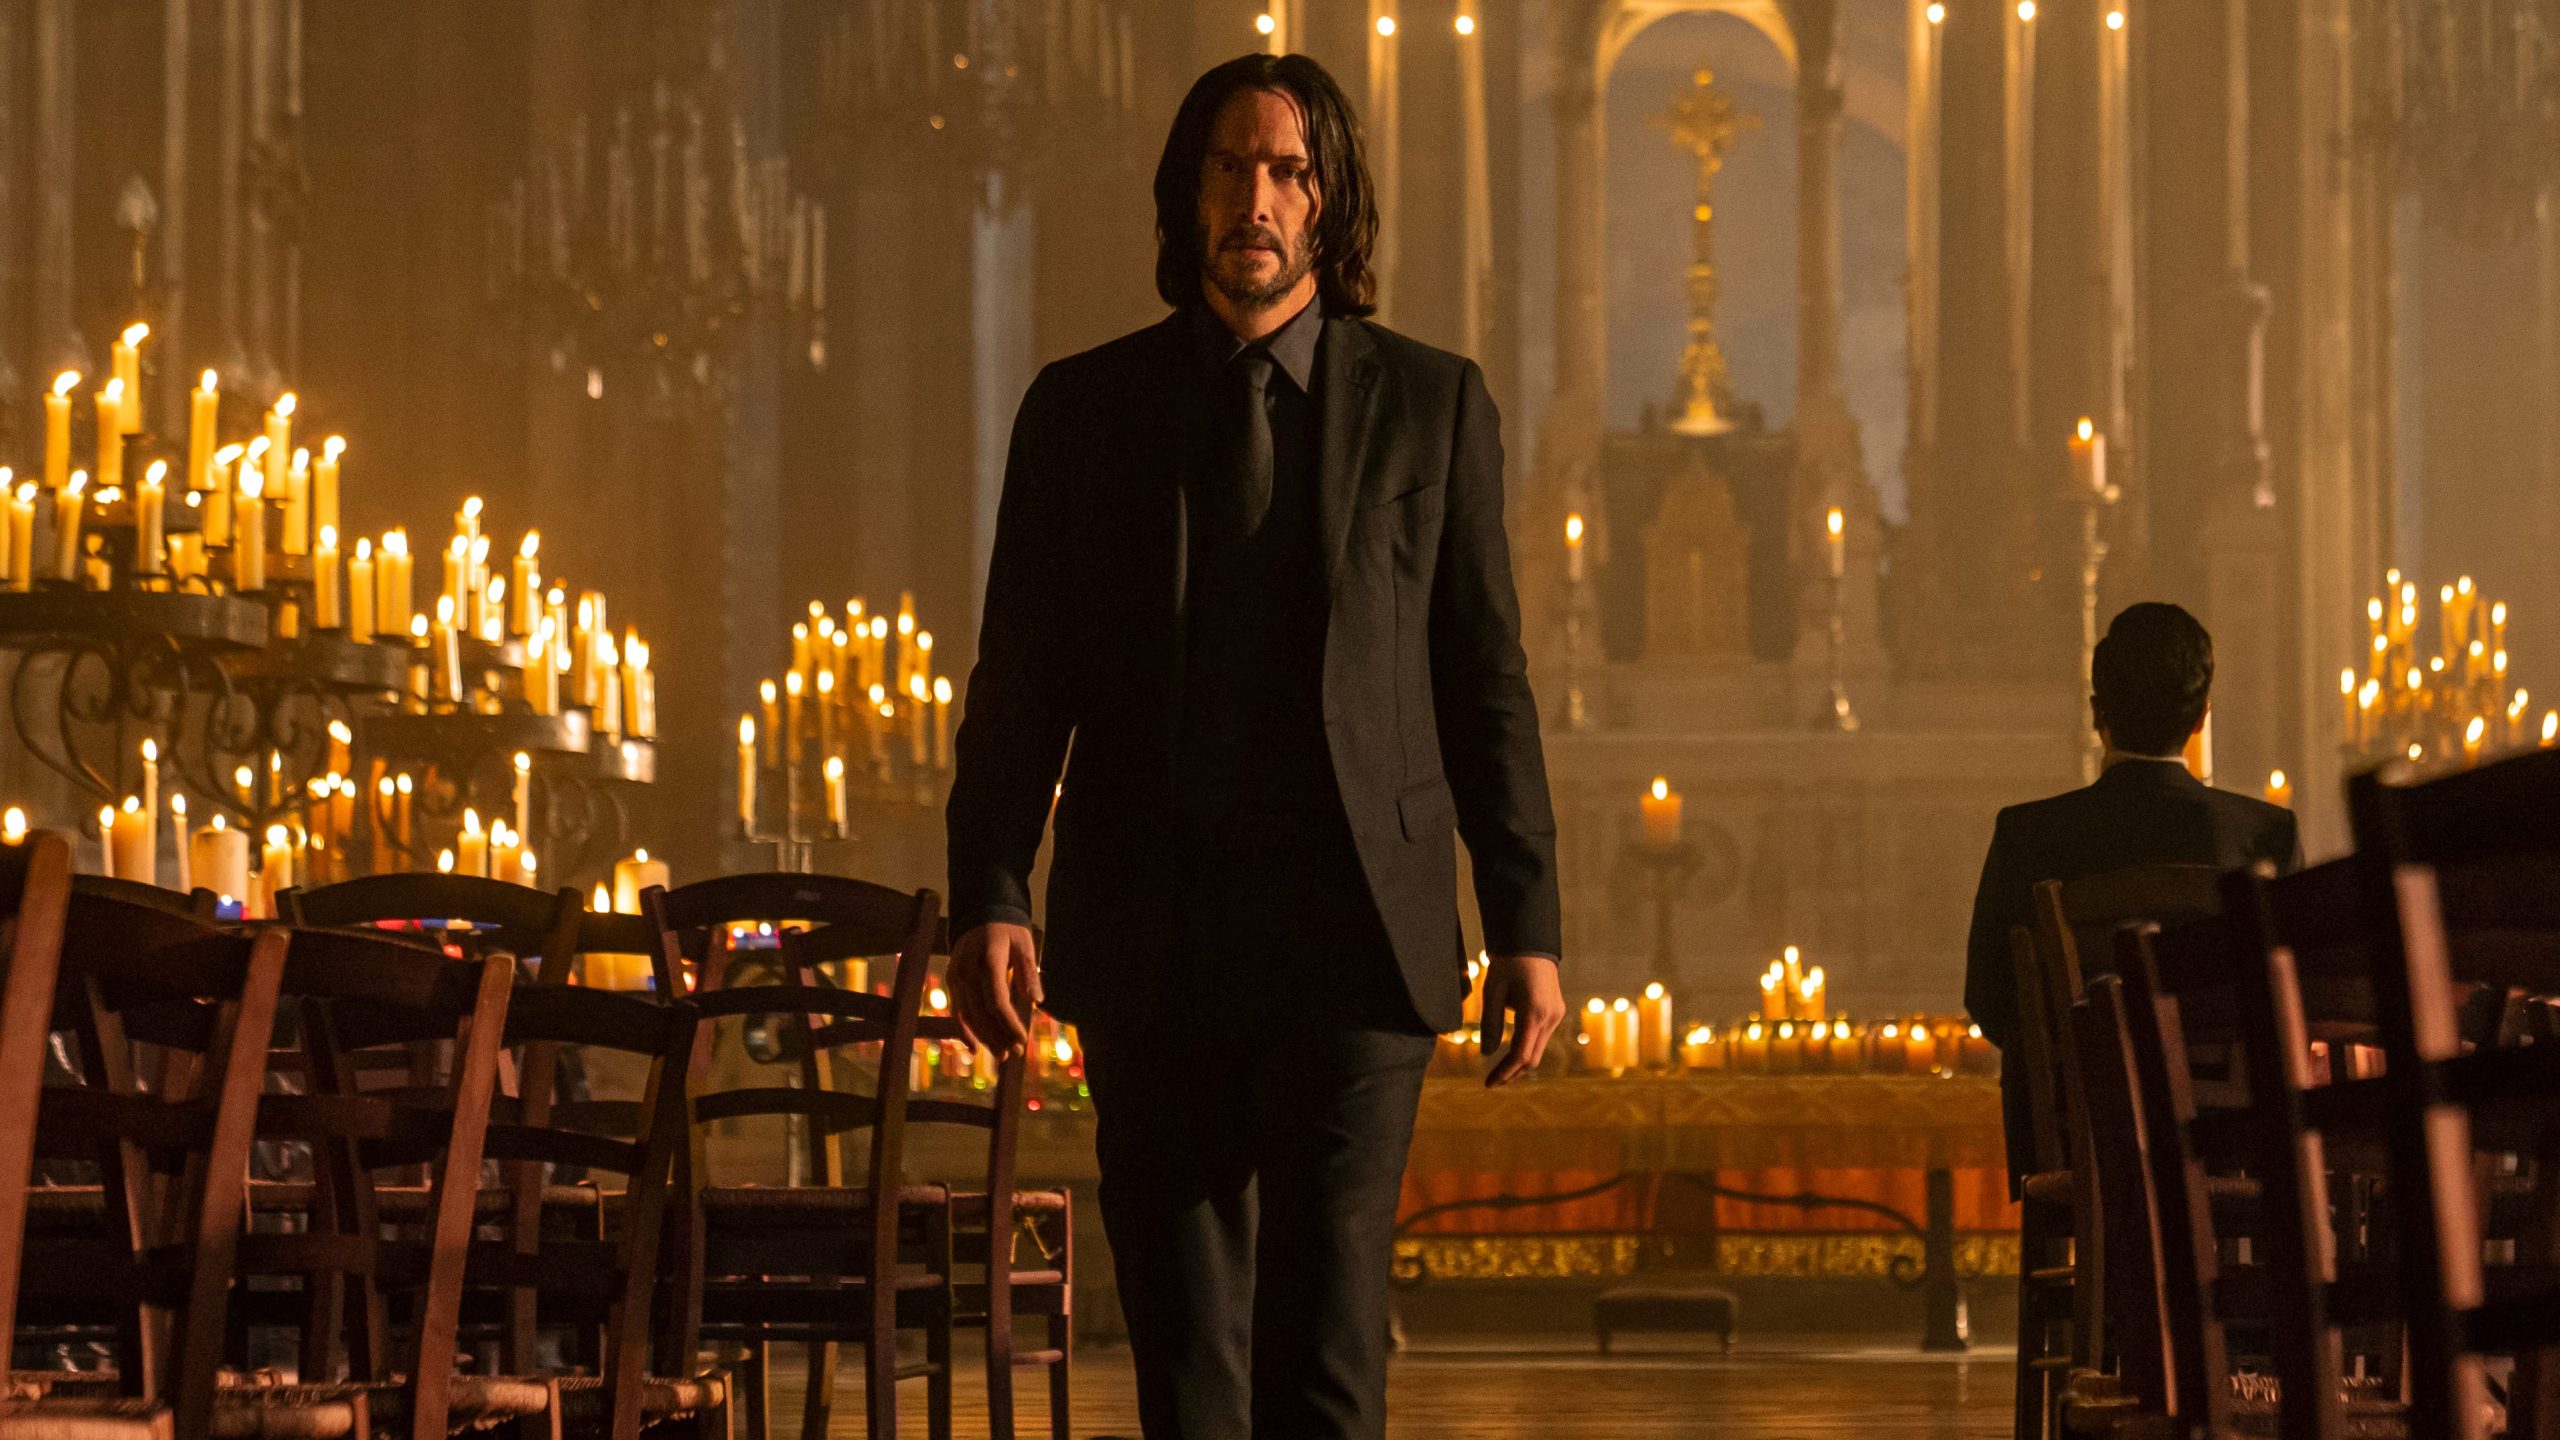 John Wick: Chapter 4 received critical acclaim when it released this year